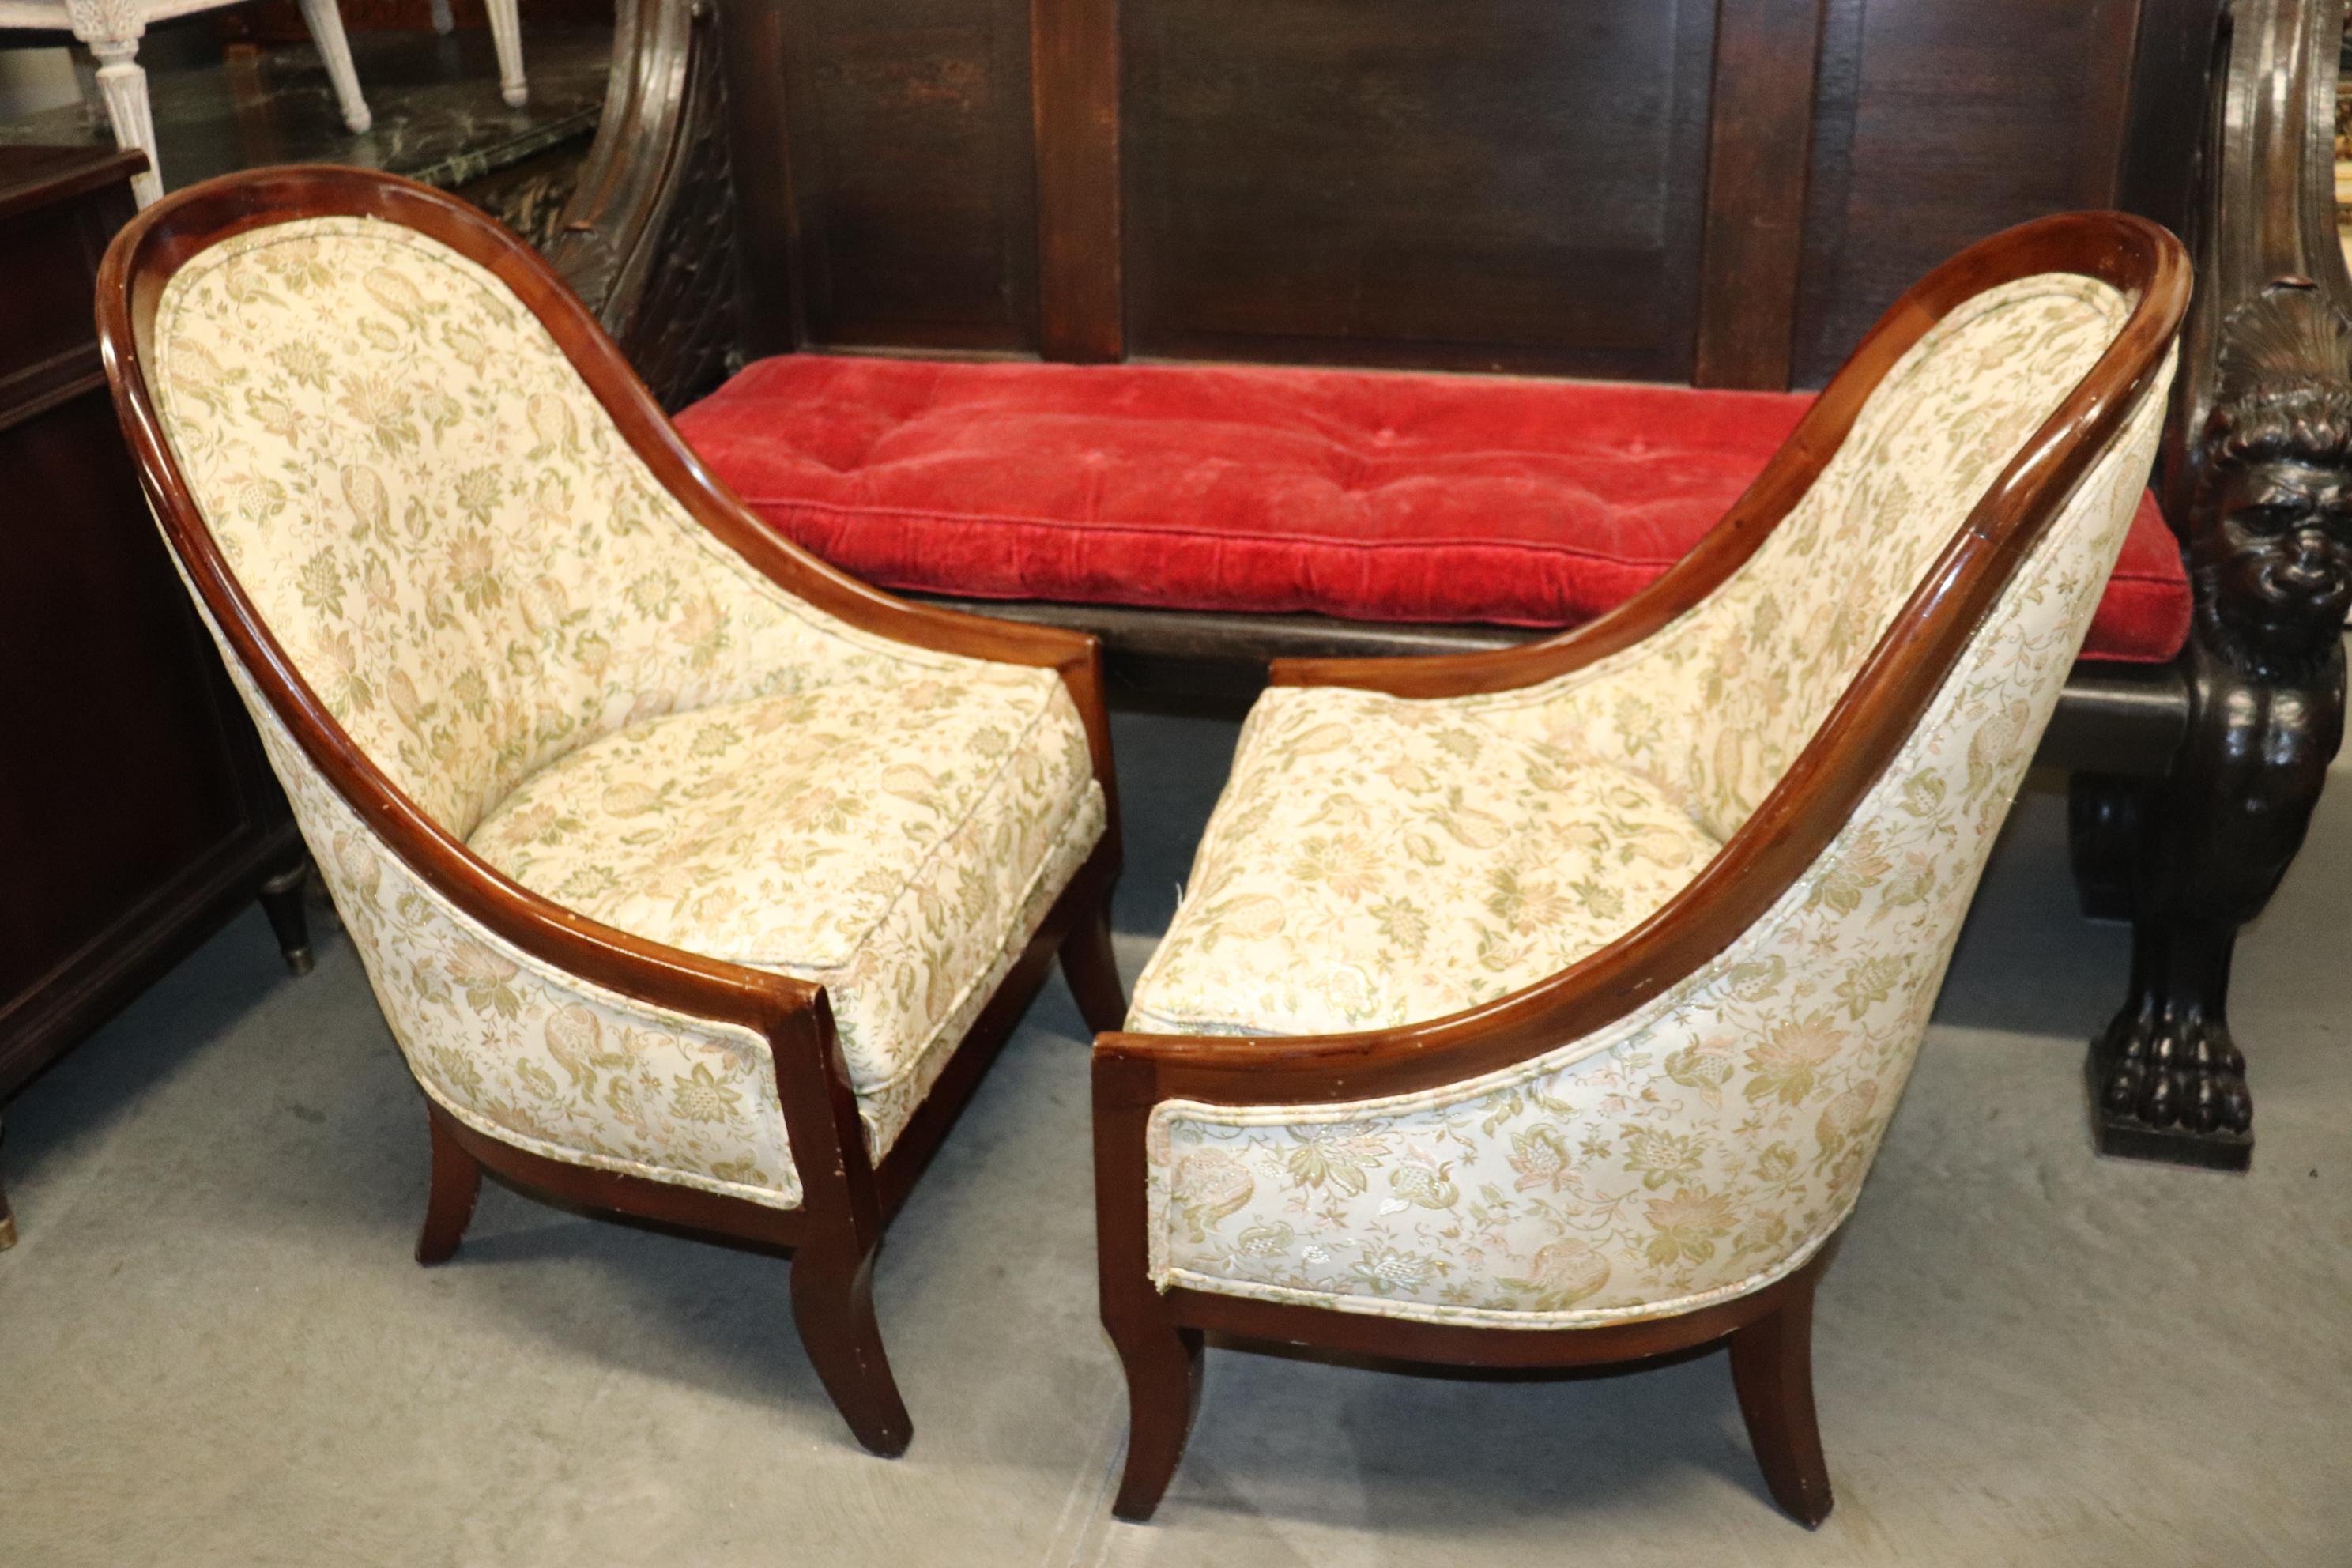 This is a fantastic pair of English Regency style tub bergere chairs. They are know for their incredible comfort and rakish handsome looks. The chairs are in good condition with nice older upholstery and measure 38 tall x 24 deep x 25 wide x 18 inch